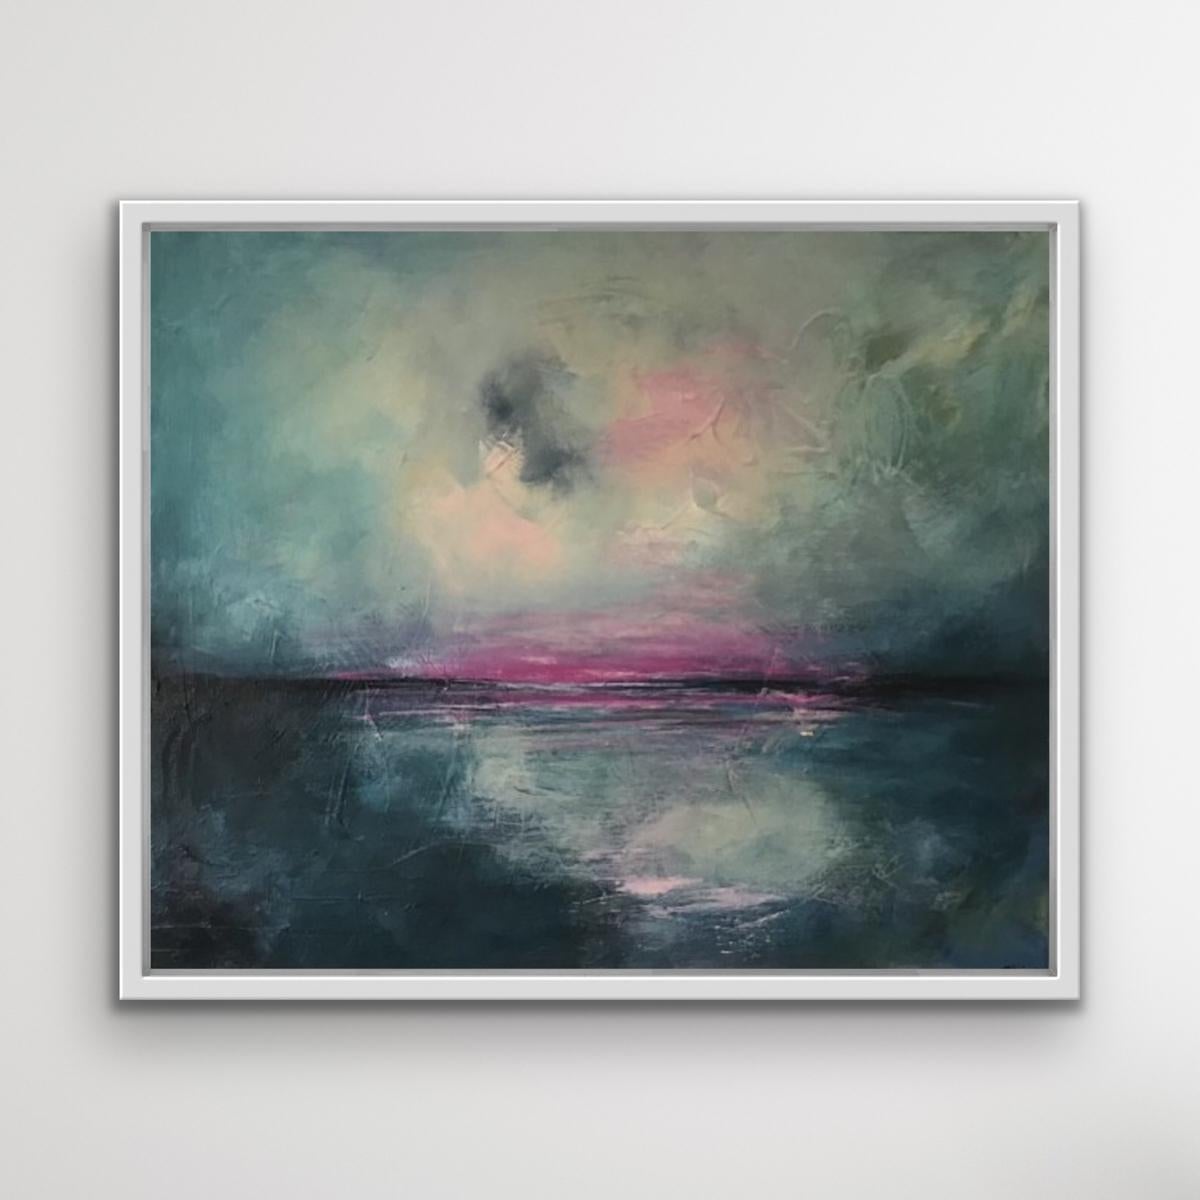 'Pink Dream' was painted in the Isle of White in the late afternoon early evening. There was a magical reflection from the Sky onto the sea which had an almost electrical feeling.

Discover more of Susanne Winter's original artwork with Wychwood Art